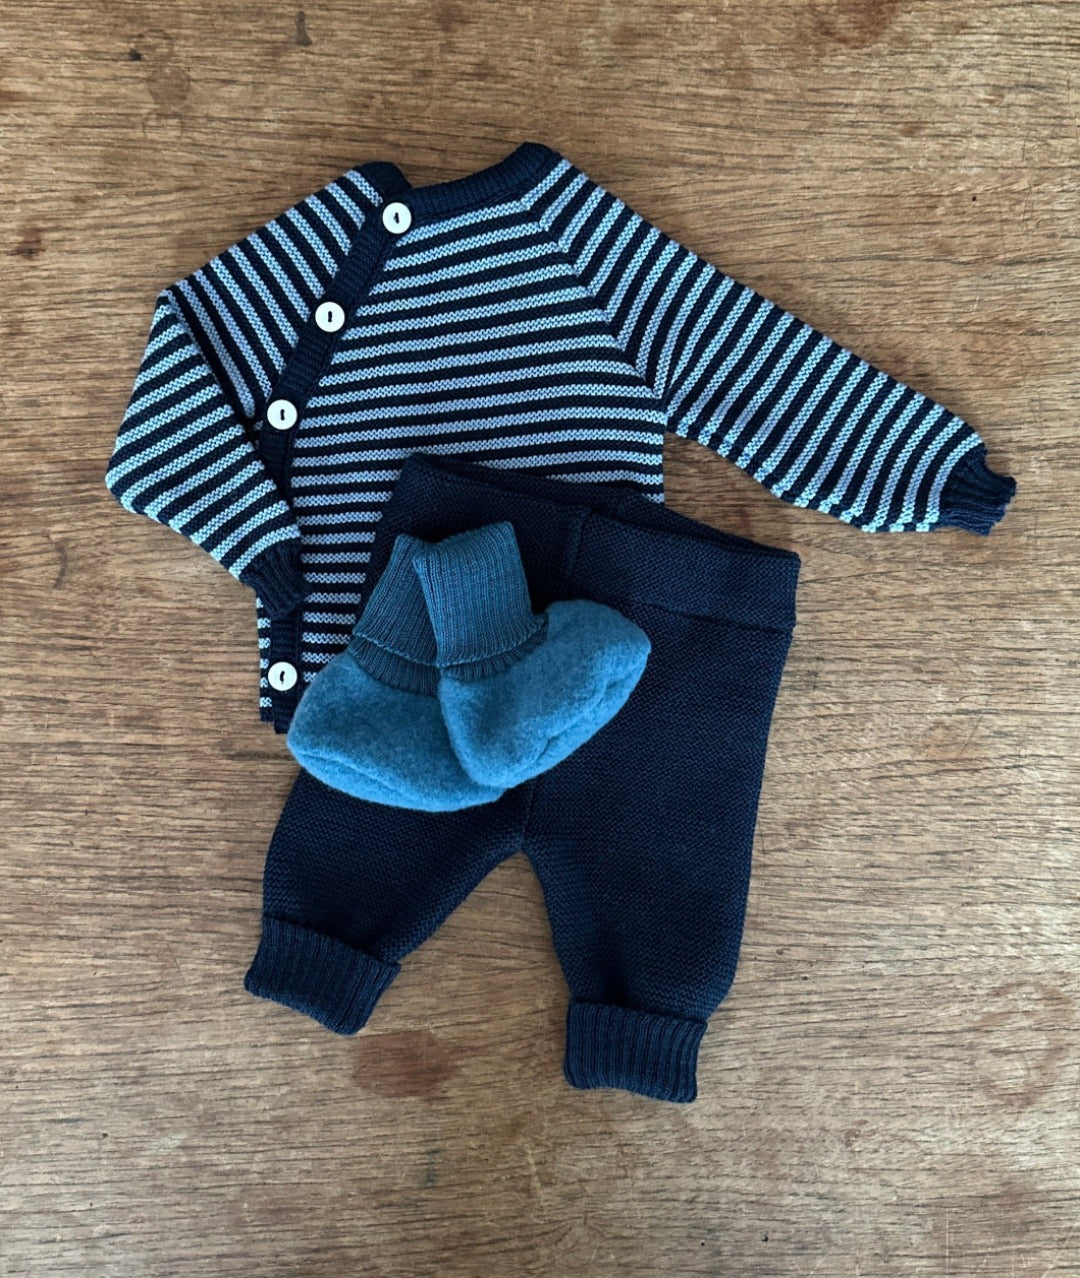 Reiff striped cardigan in navy and light blue, navy wool pants and ocean blue wool fleece booties. All made by Reiff